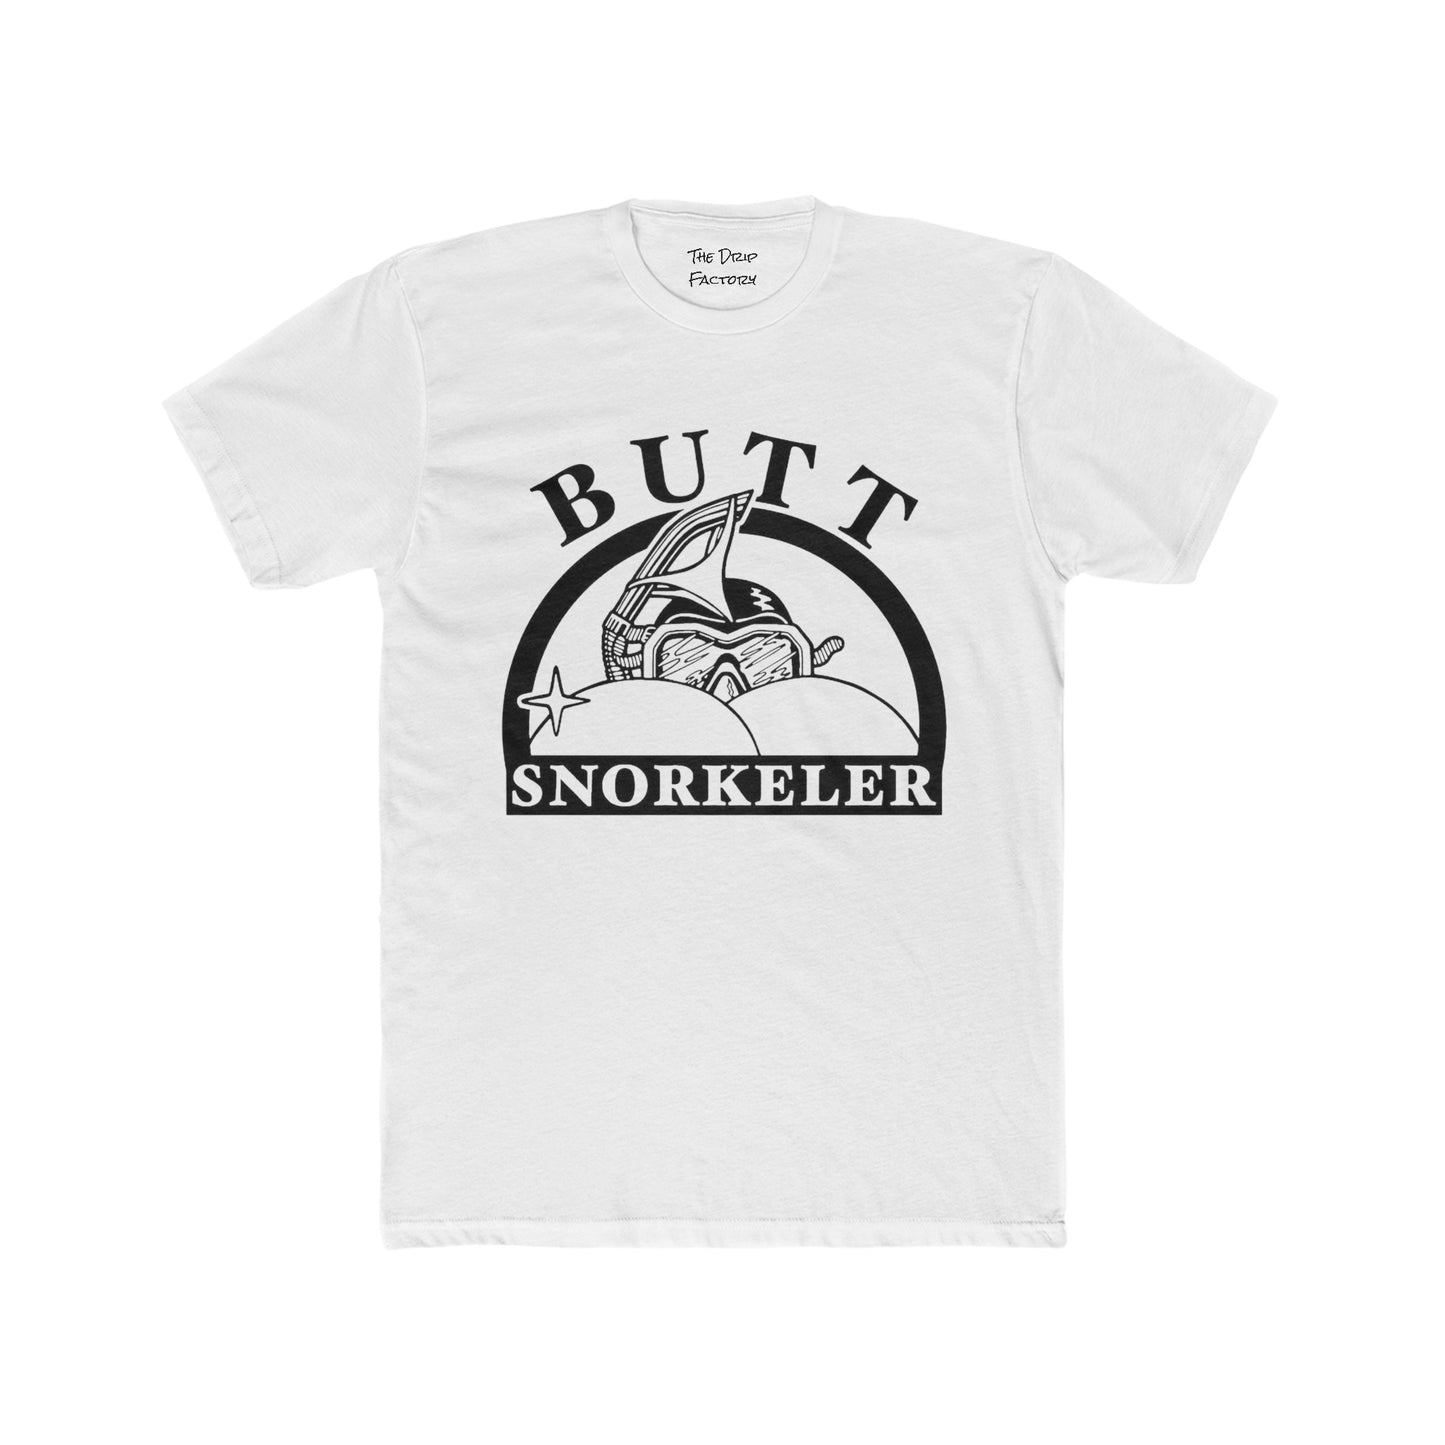 Butt Snorkeler - Funny Comedy T-Shirts For Men and Women Goofy Shirts